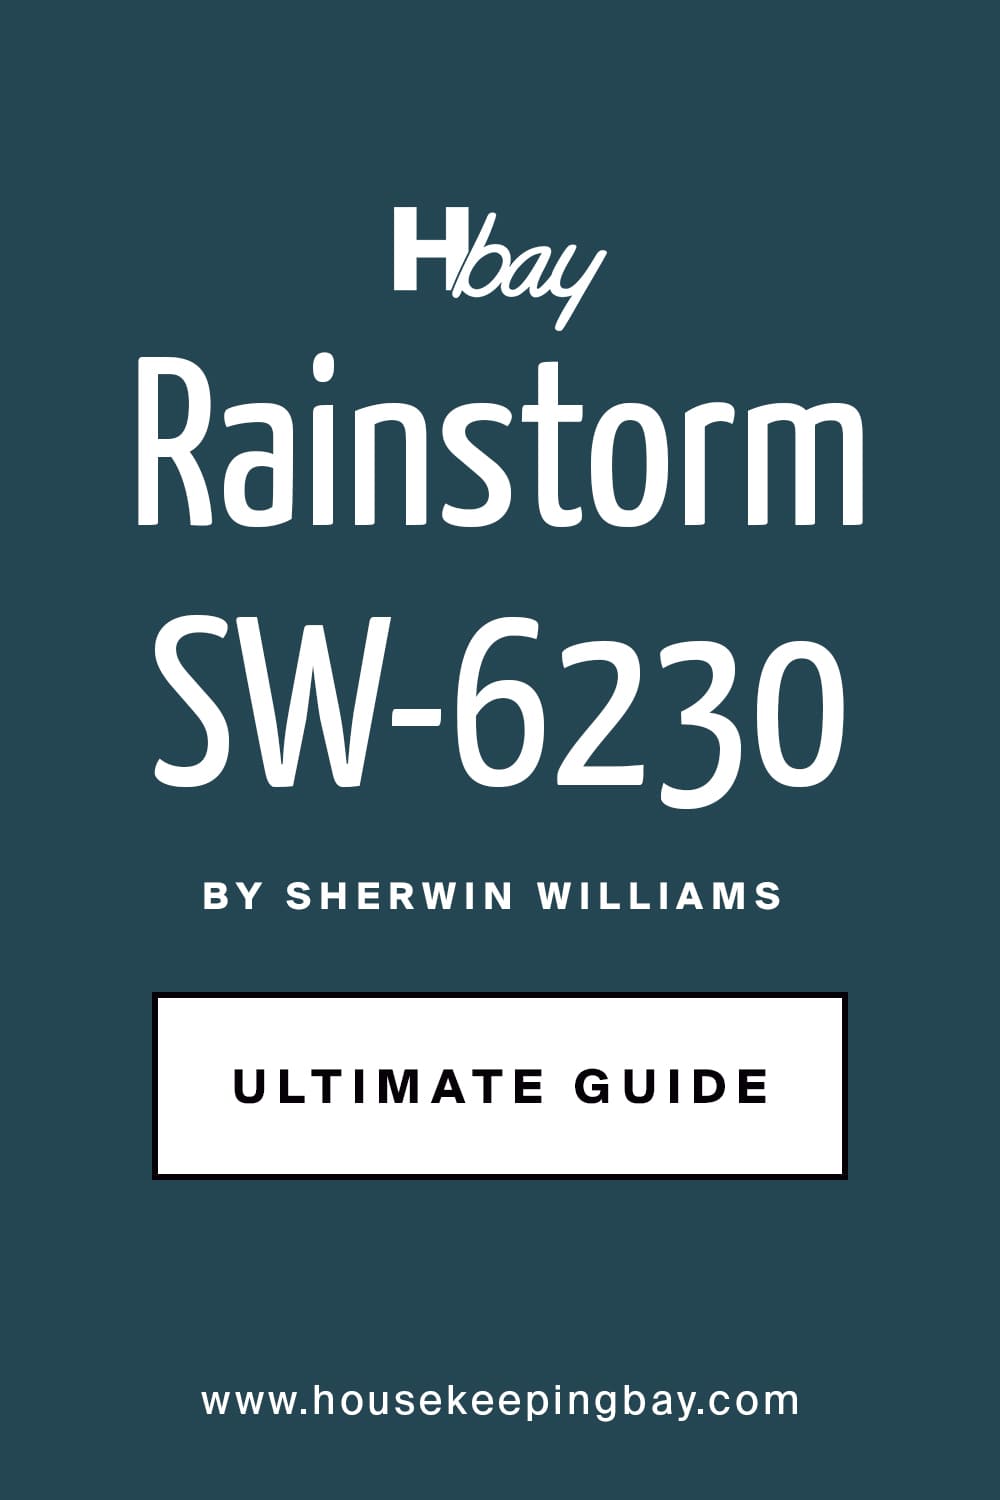 Rainstorm SW-6230 Paint Color by Sherwin Williams Ultimate Guide